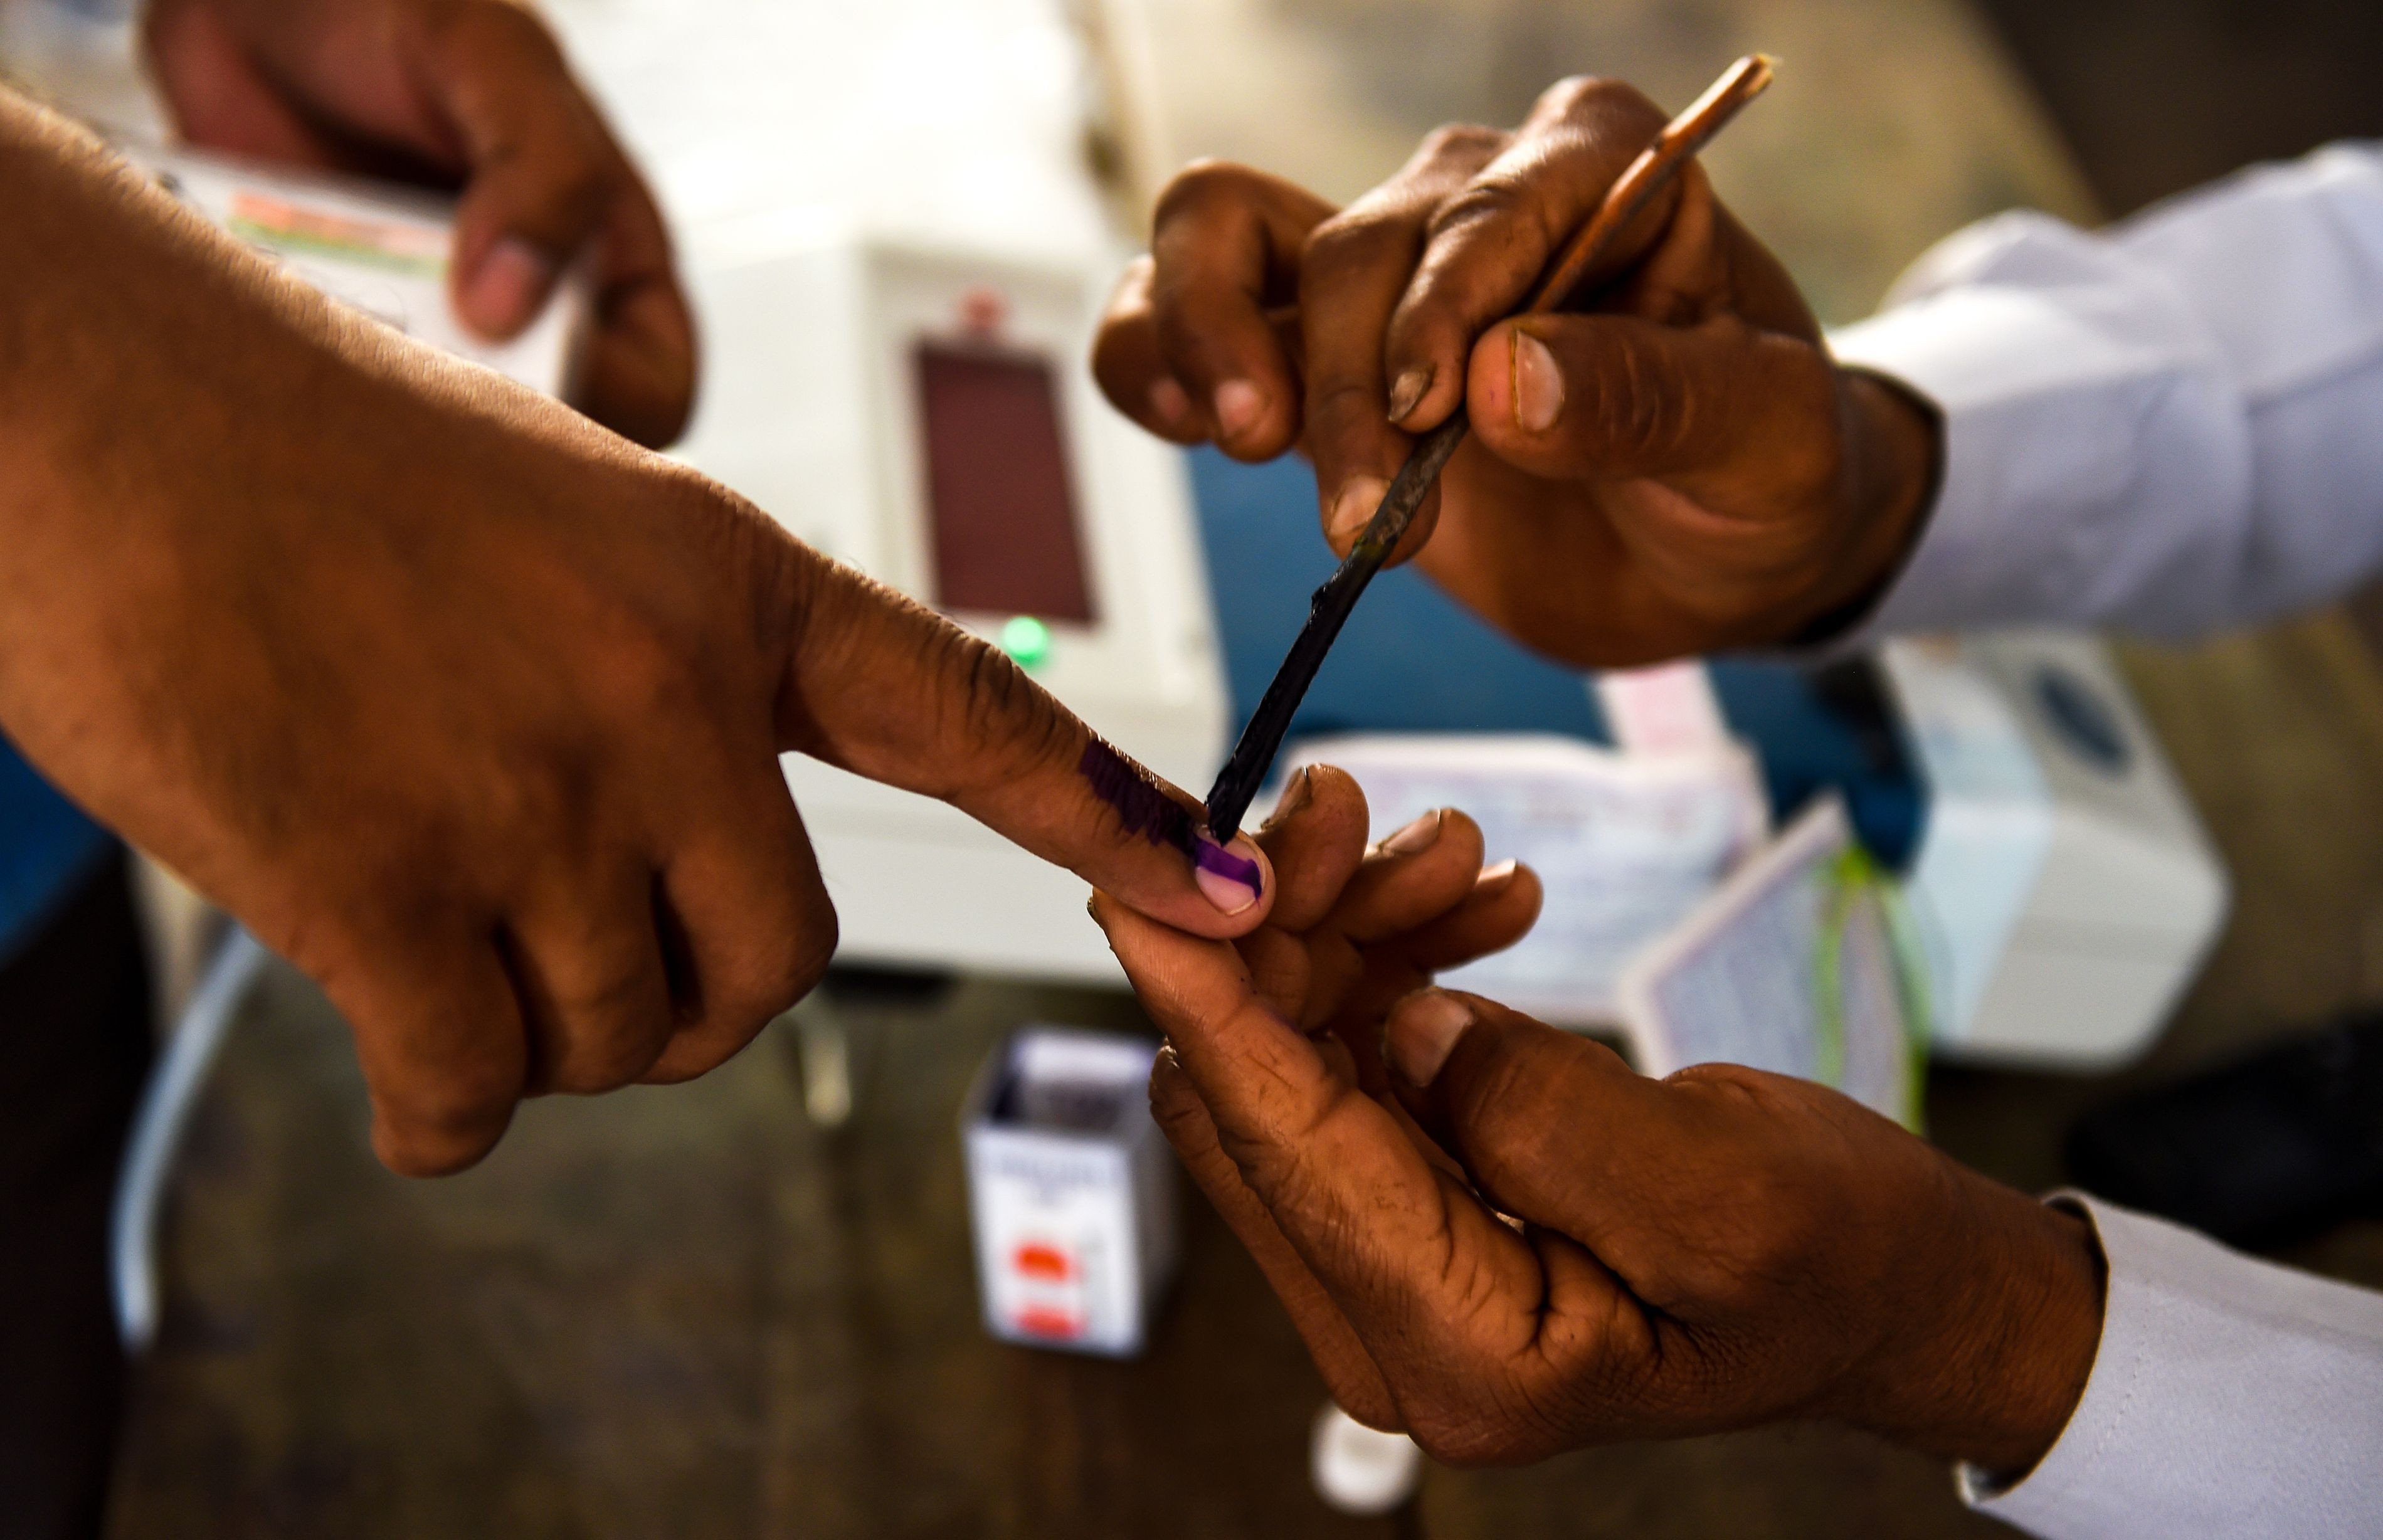 An Indian voter gets her finger marked with ink at a polling station in Uttar Pradesh to show she has voted. Photo: AFP